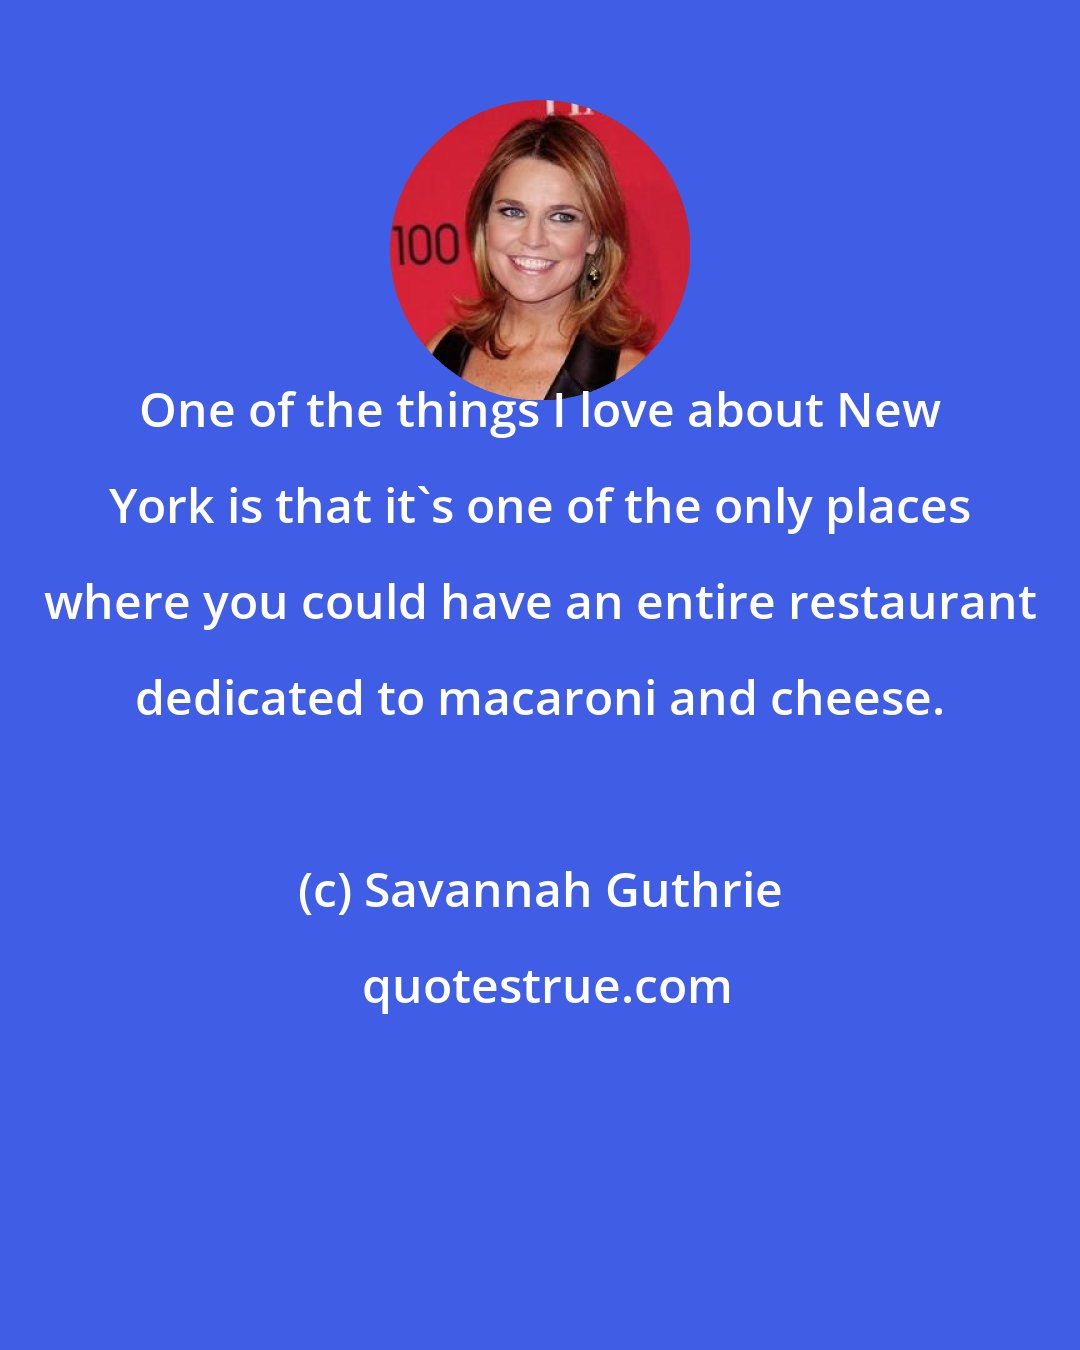 Savannah Guthrie: One of the things I love about New York is that it's one of the only places where you could have an entire restaurant dedicated to macaroni and cheese.